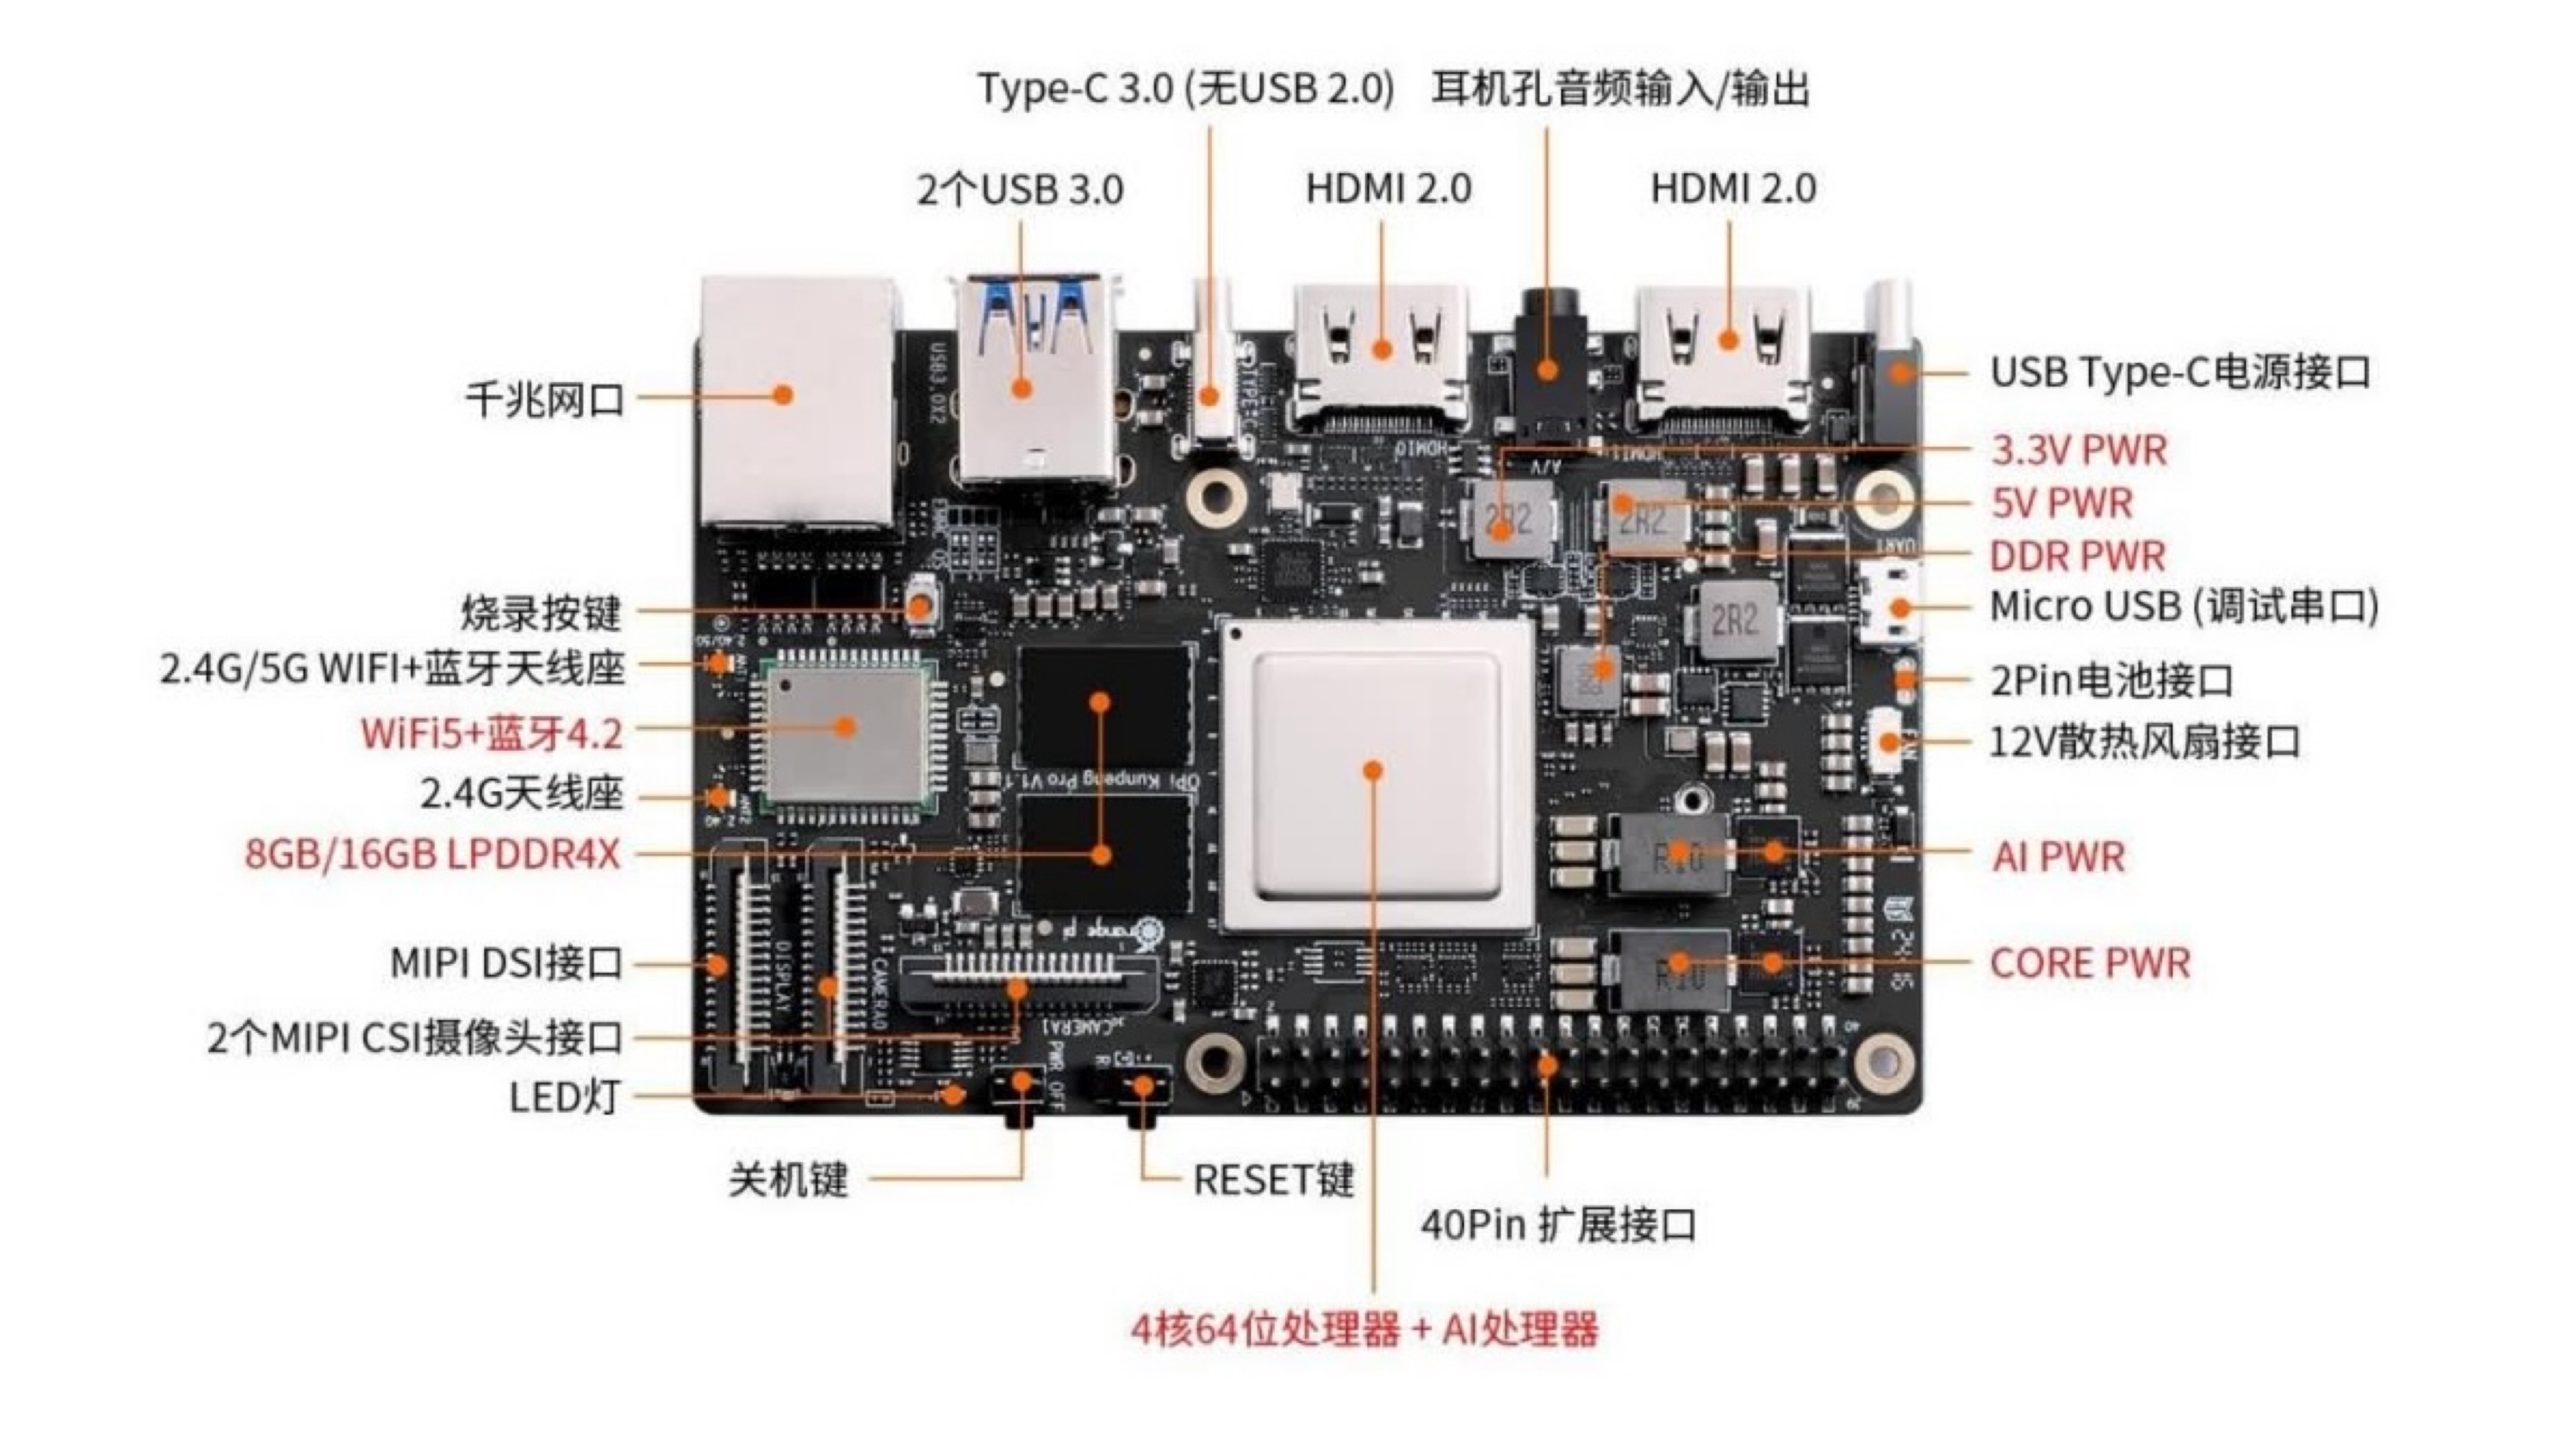 huawei-and-orangepi-launch-new-dev-board-with-mystery-cpu-and-ai-processor-—-huawei-again-hides-chip-specs-from-prying-eyes